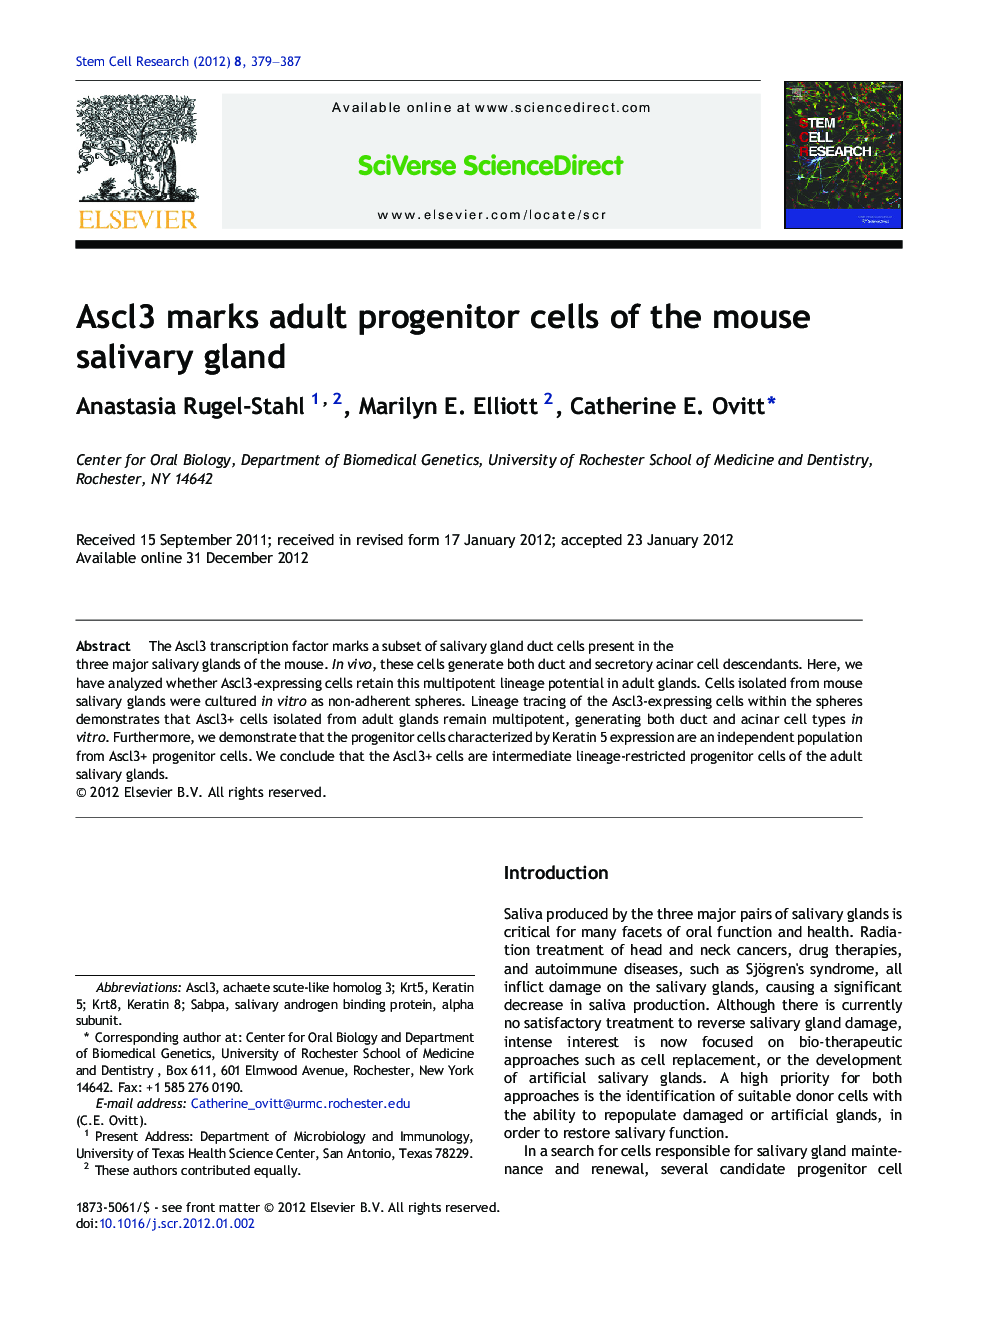 Ascl3 marks adult progenitor cells of the mouse salivary gland